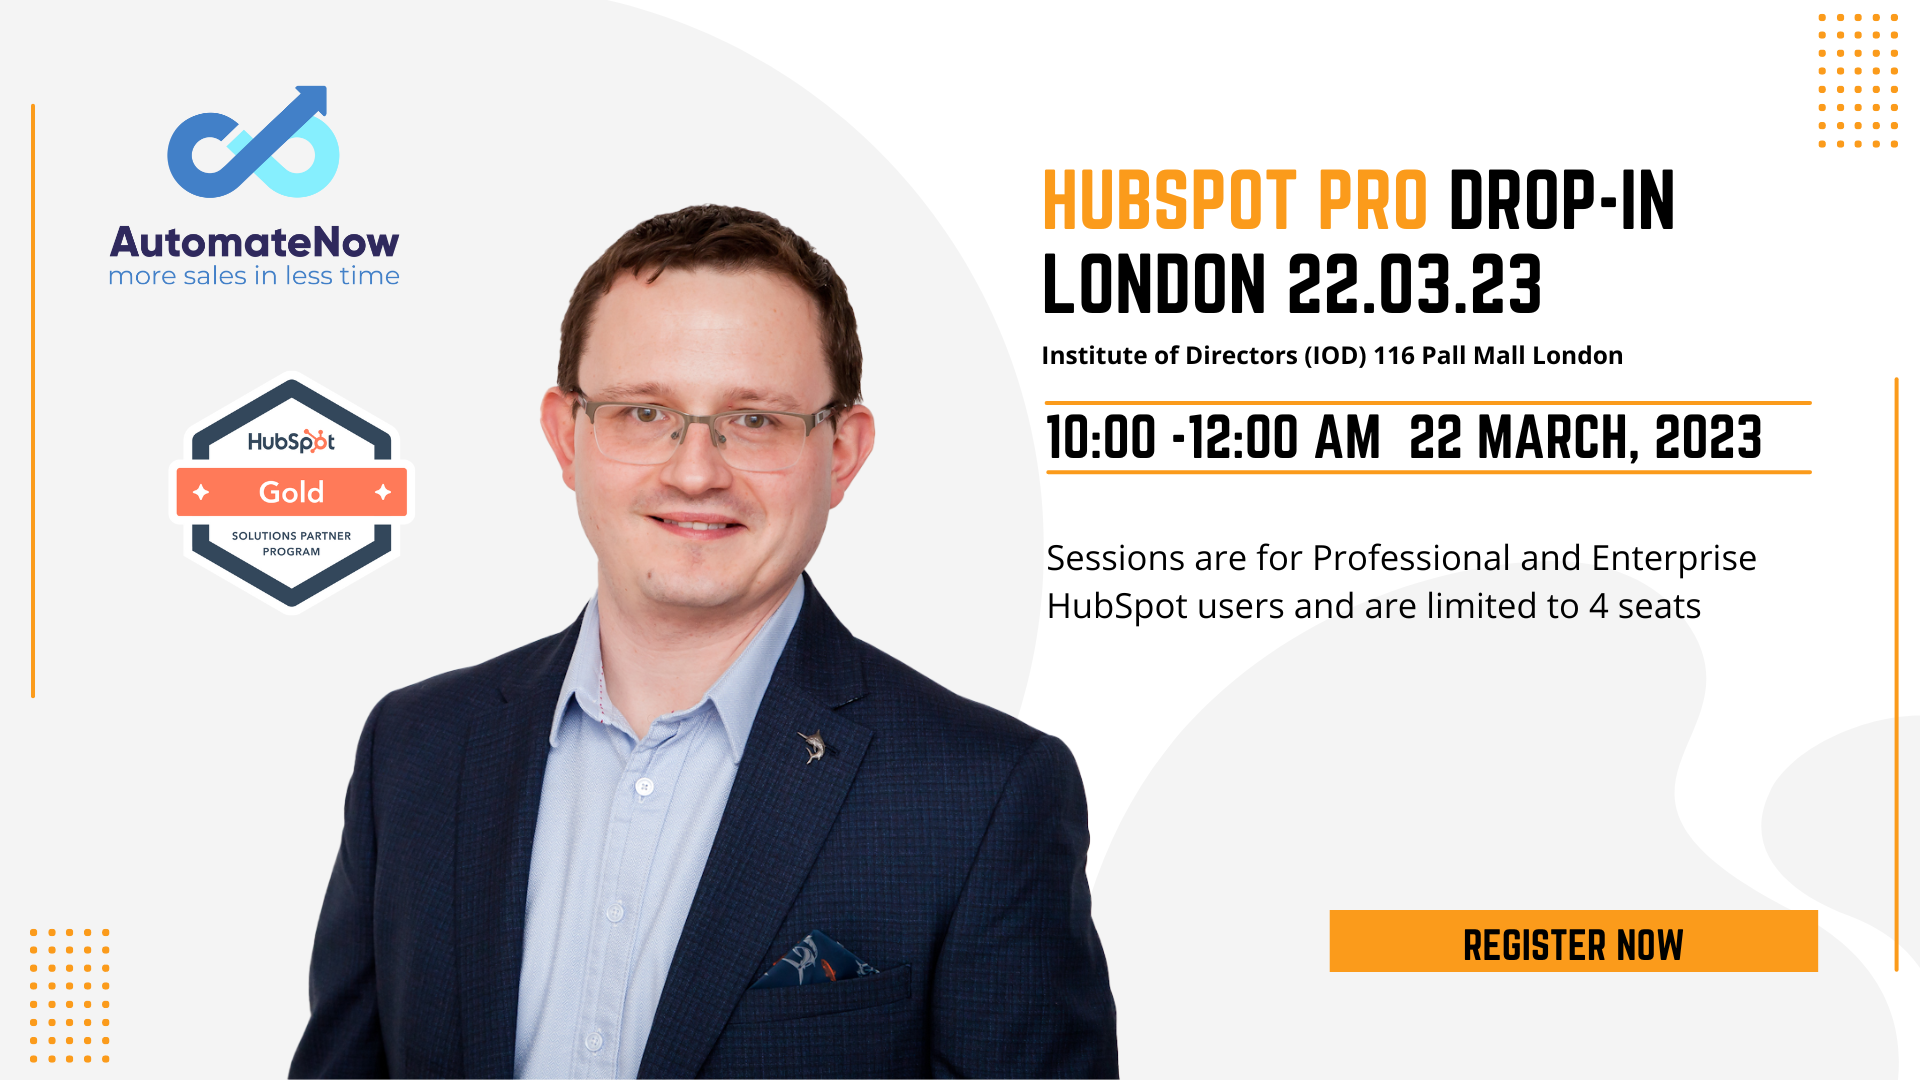 HubSpot Pro Drop-in Session London 22.03.23